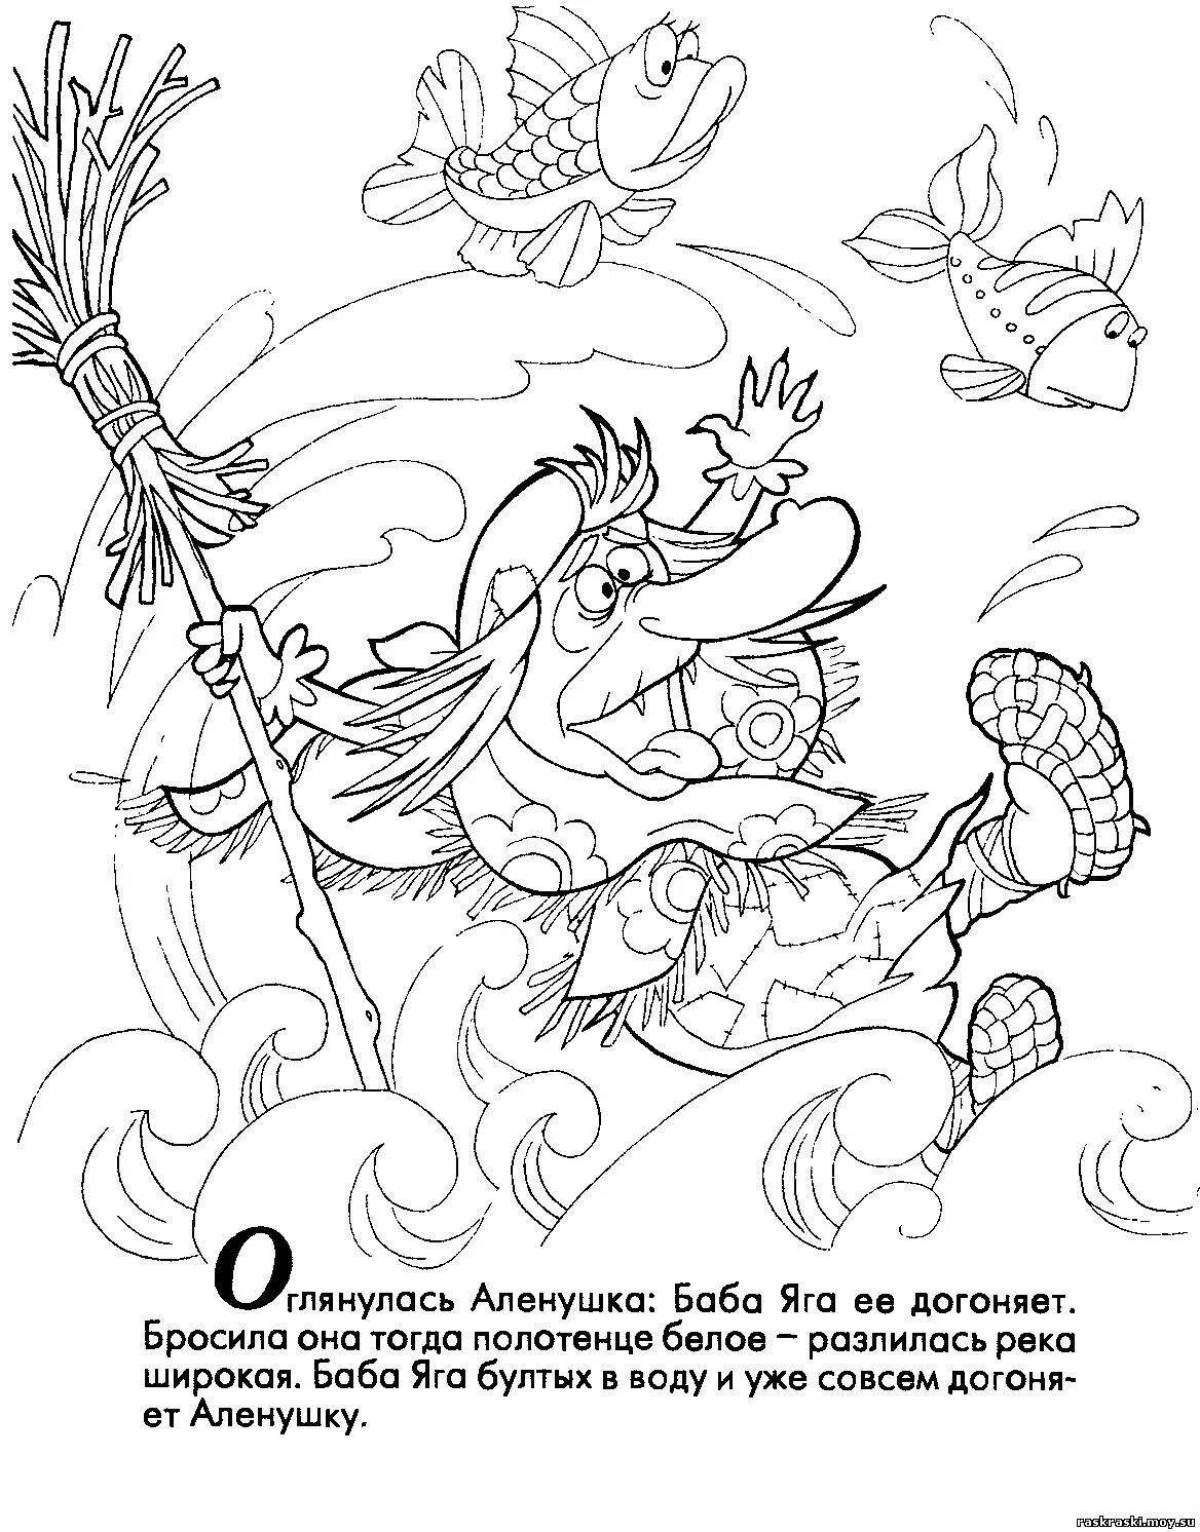 Delightful coloring book for children 3-4 years old based on Pushkin's fairy tales